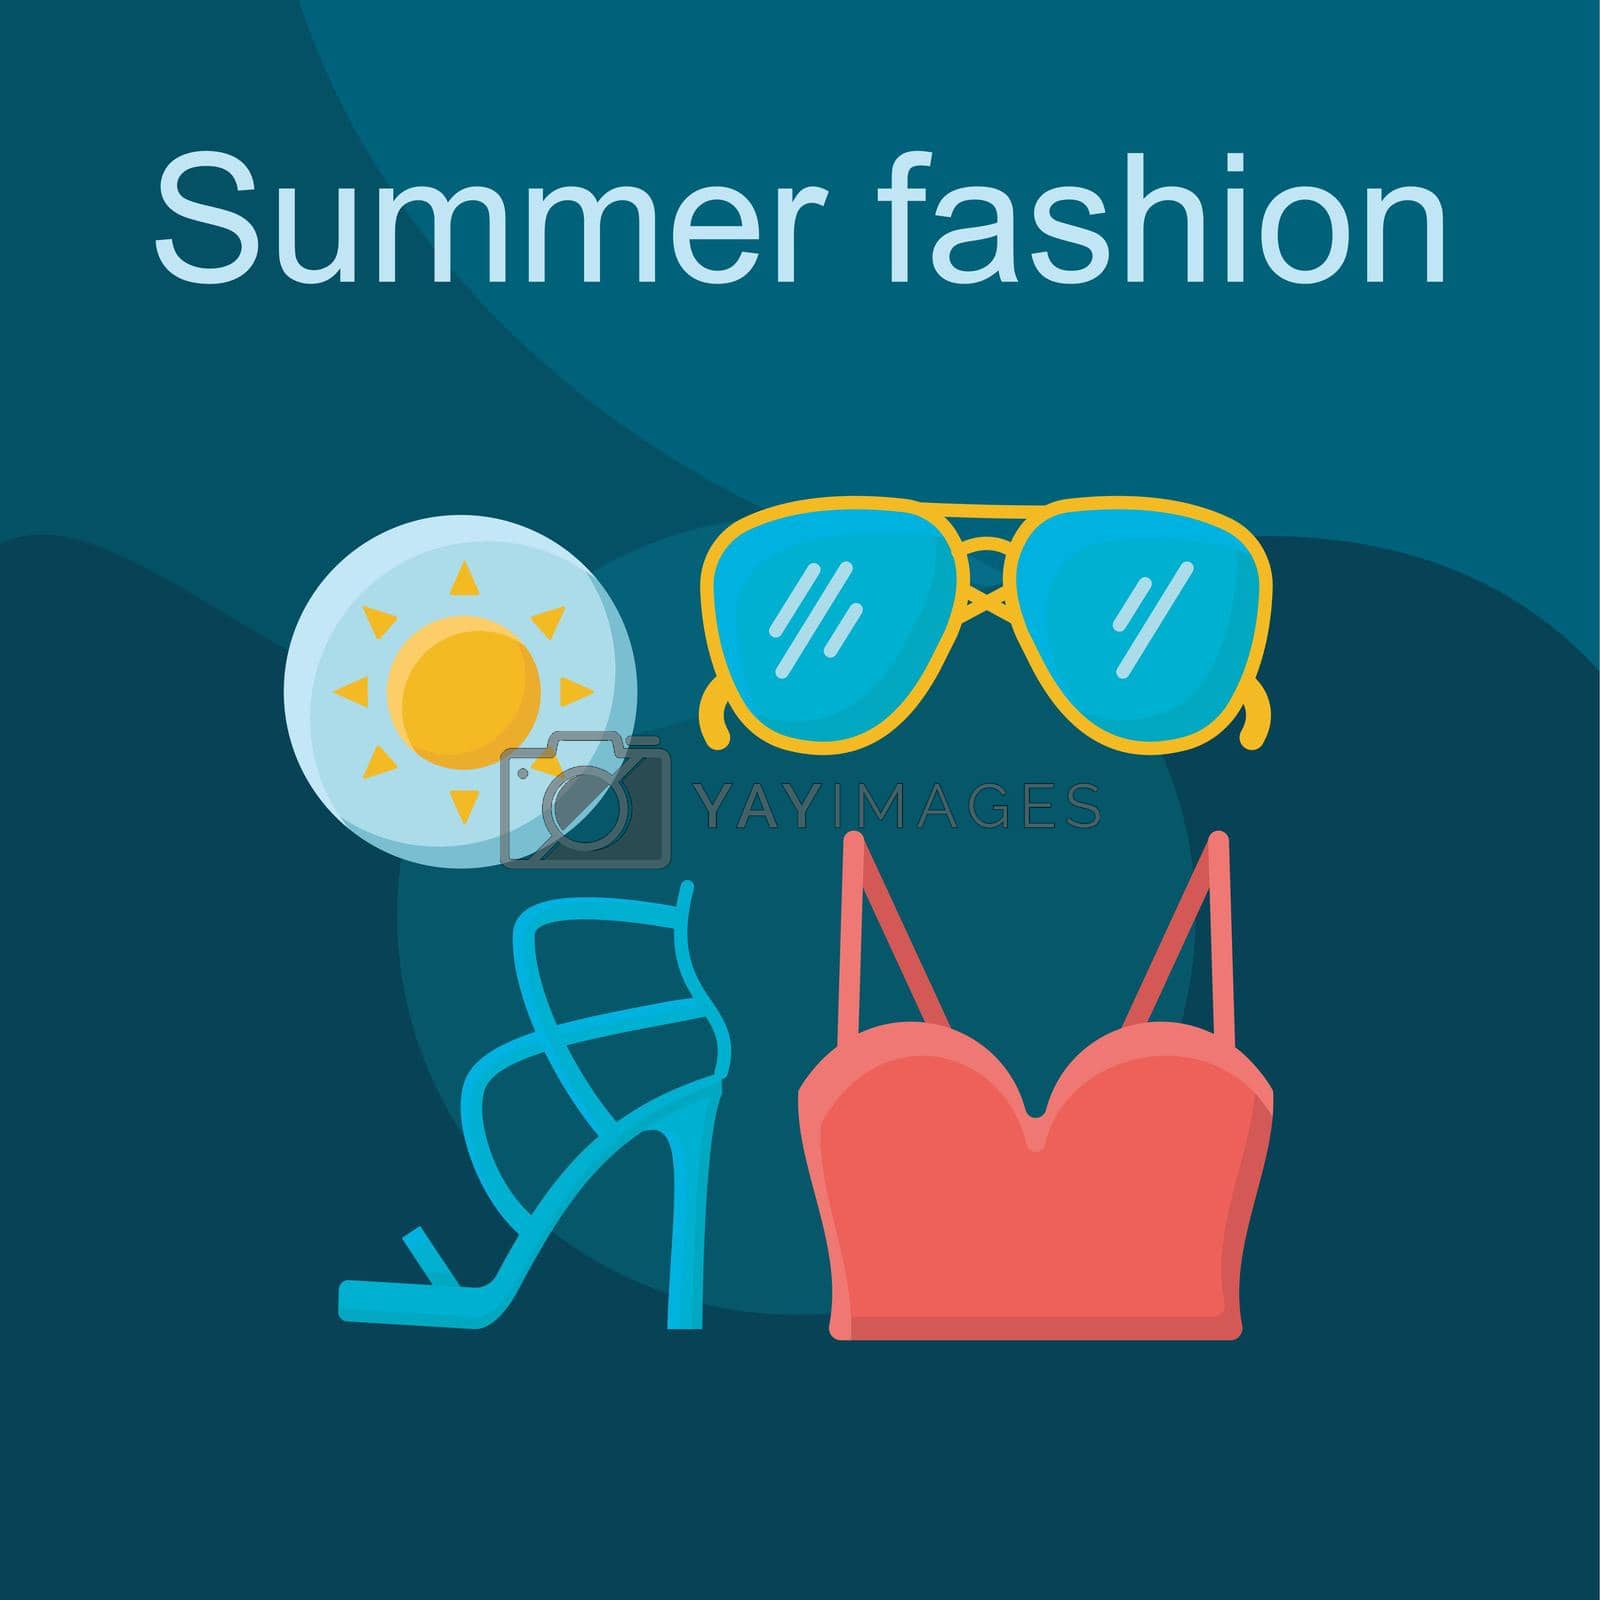 Summer fashion flat concept vector icon. Shopping idea cartoon color illustrations set. Clothes, shoes, accessories. Womens outfit. Crop top, sunglasses, high heels. Isolated graphic design element